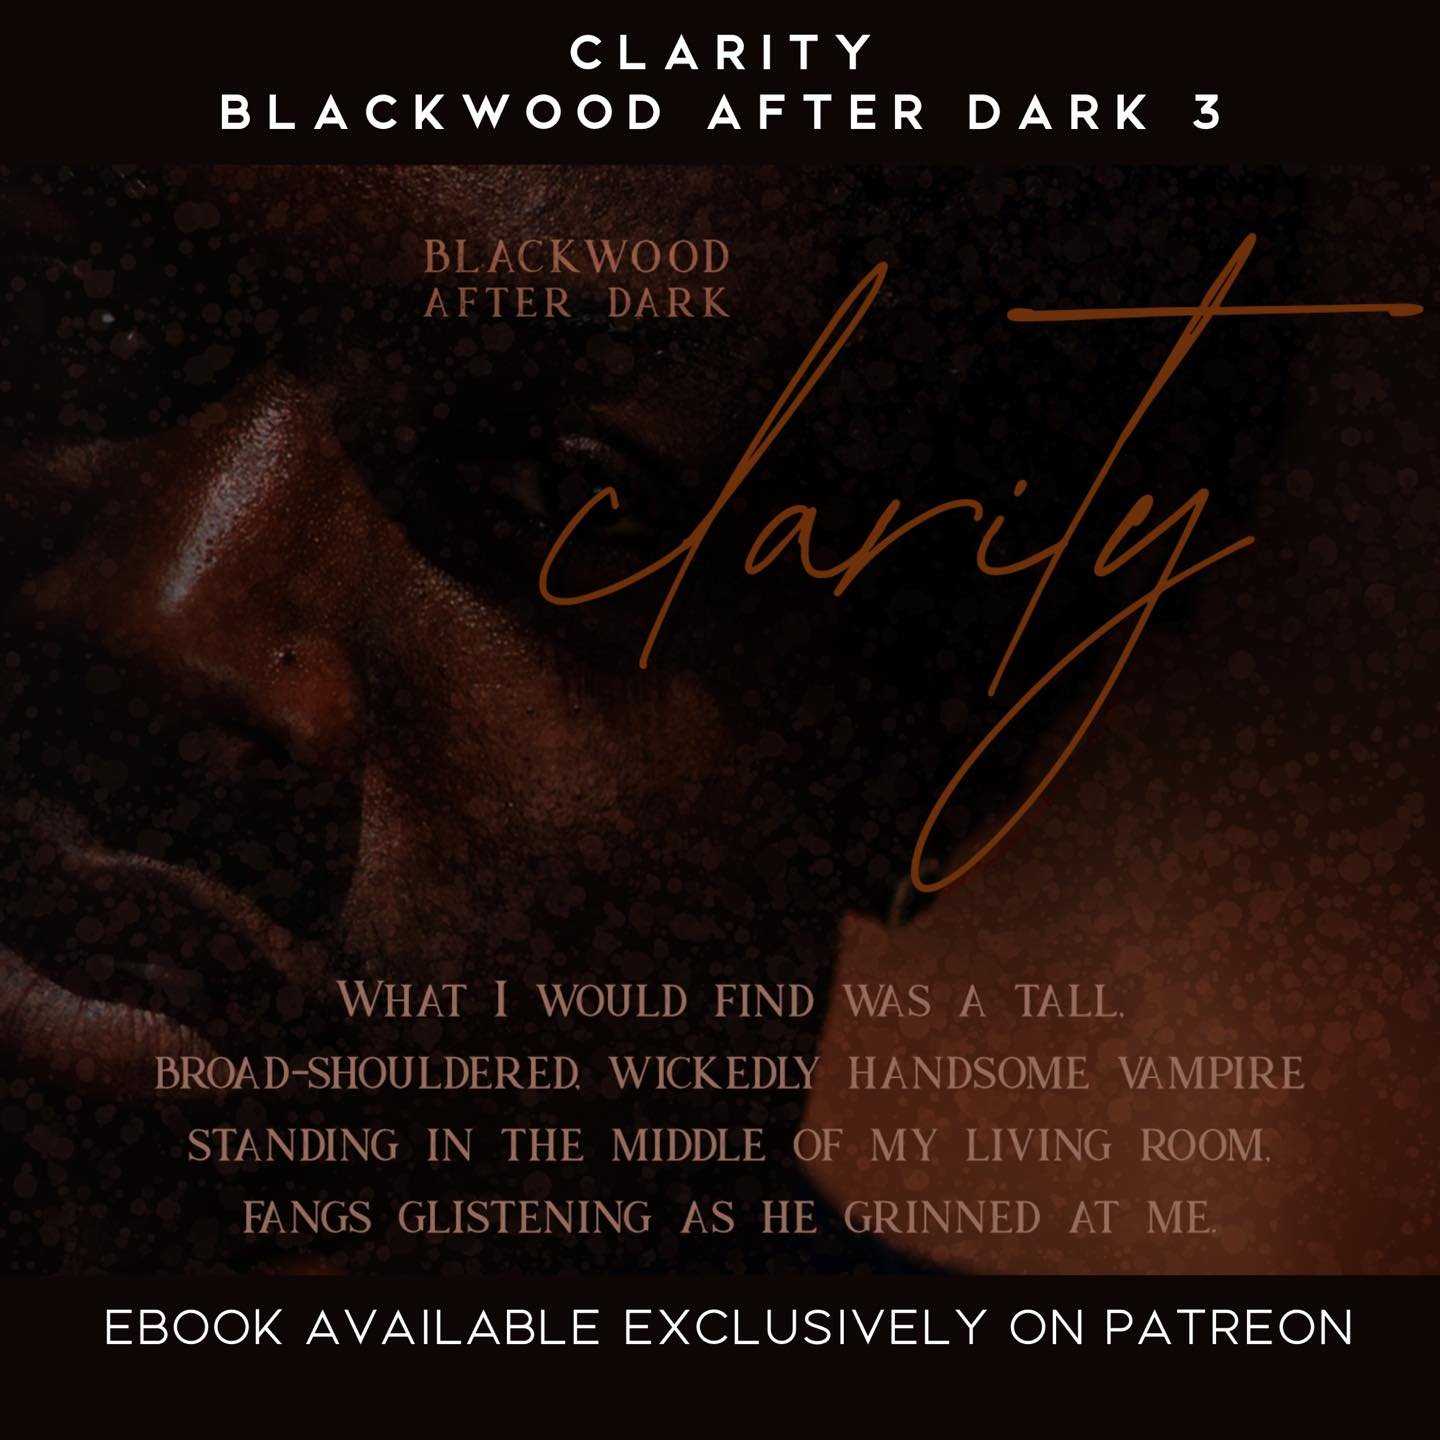 Clarity, Book 3 in the Blackwood After Dark series, is now available exclusively on Patreon!

Not a patron? Join today at patreon.com/ccj to get access to this and so much more. 

#beingmrsjones #ccj #ccjromance #ccjmultiverse #loveinwarmhues #blackr